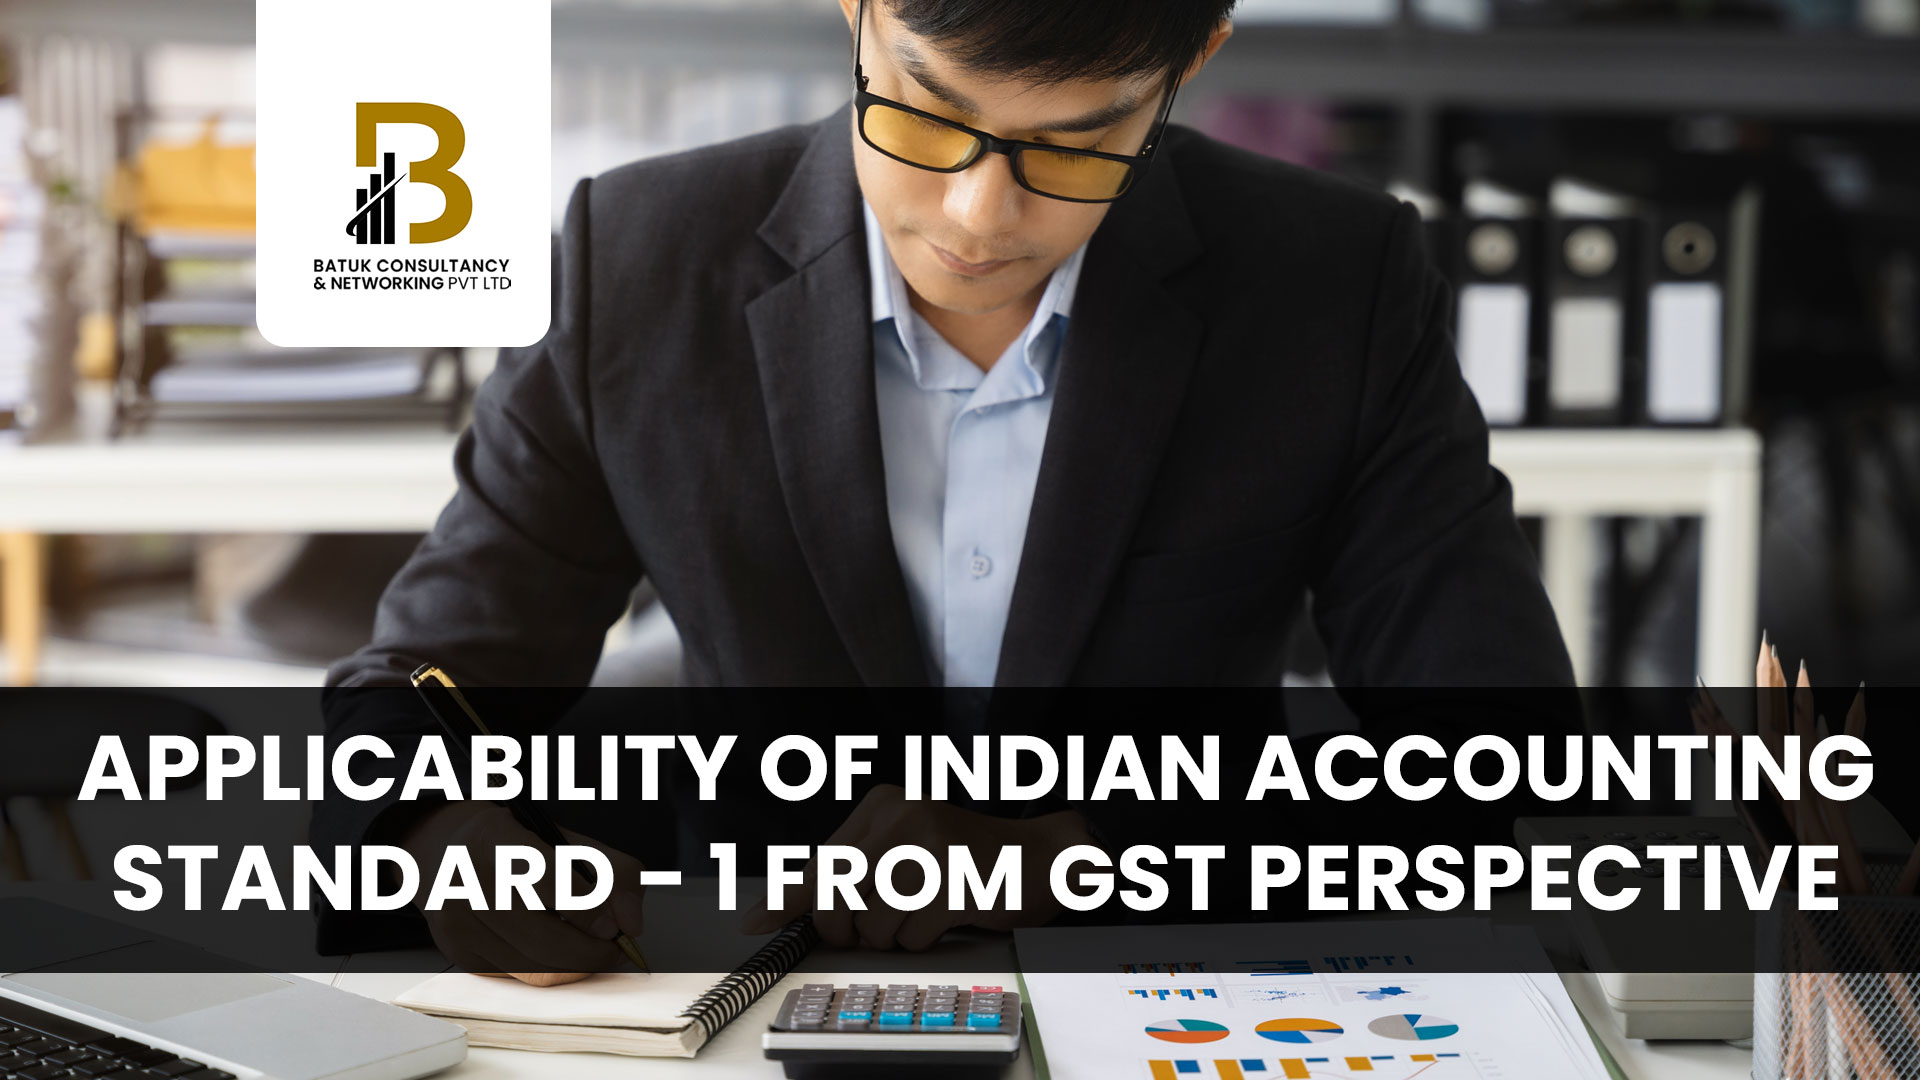 Applicability of Indian Accounting Standard - 1 from GST Perspective